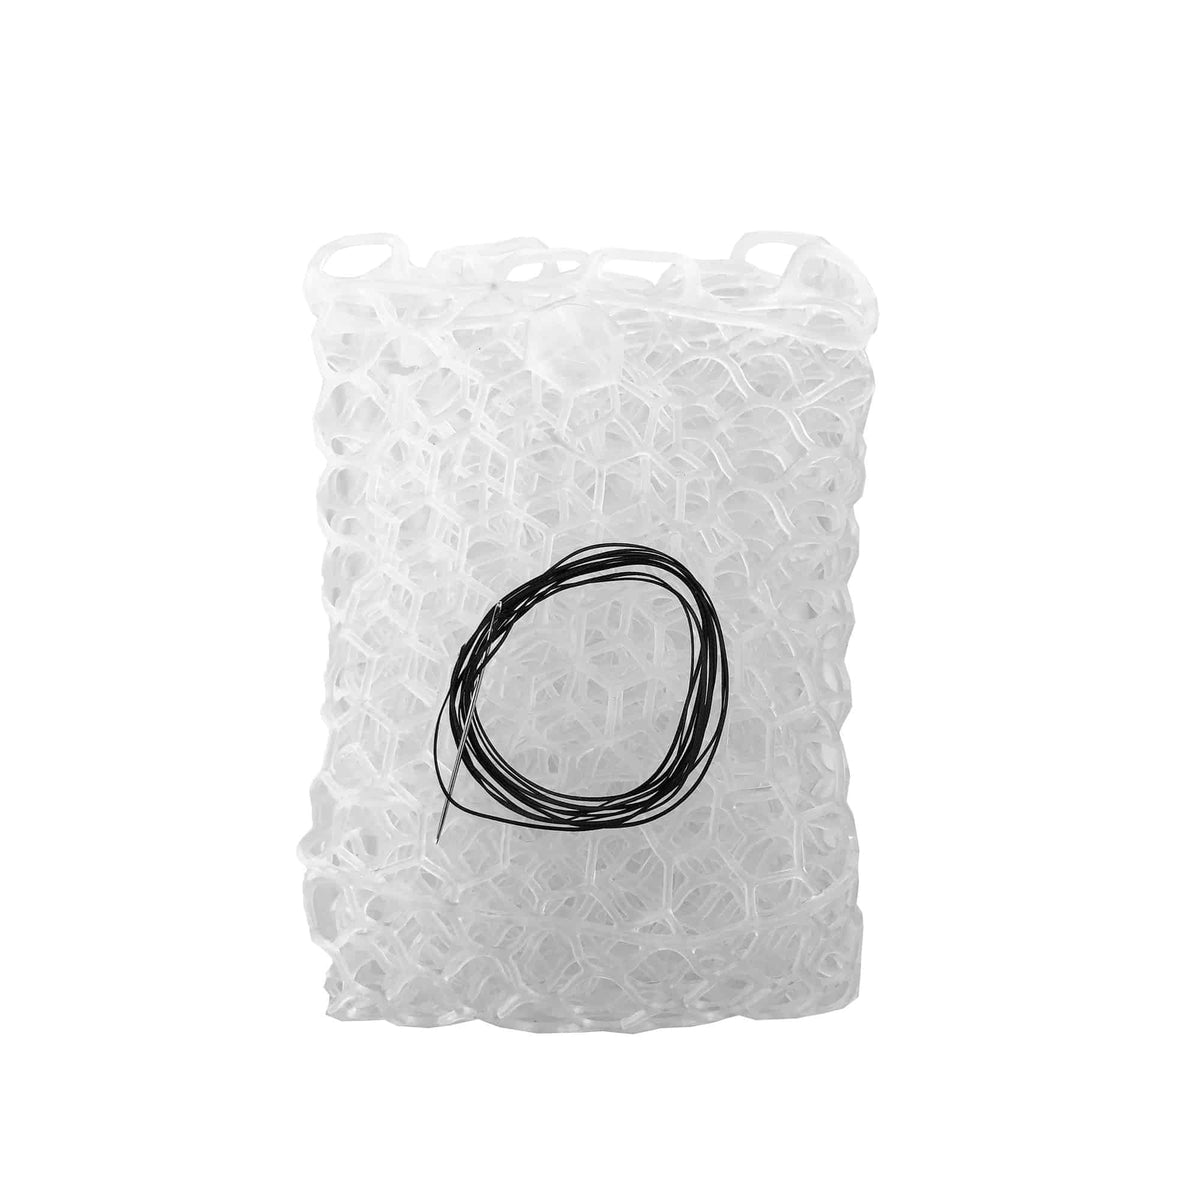 Fishpond Nomad Hand Nets Replacement Rubber Net 15 Inch Clear Fishpond Nomad Emerger Net Replacement Basket, Fishpond Nomad Mid-Length Net Replacement Basket, Fishpond Nomad Guide Nets Replacement Bag